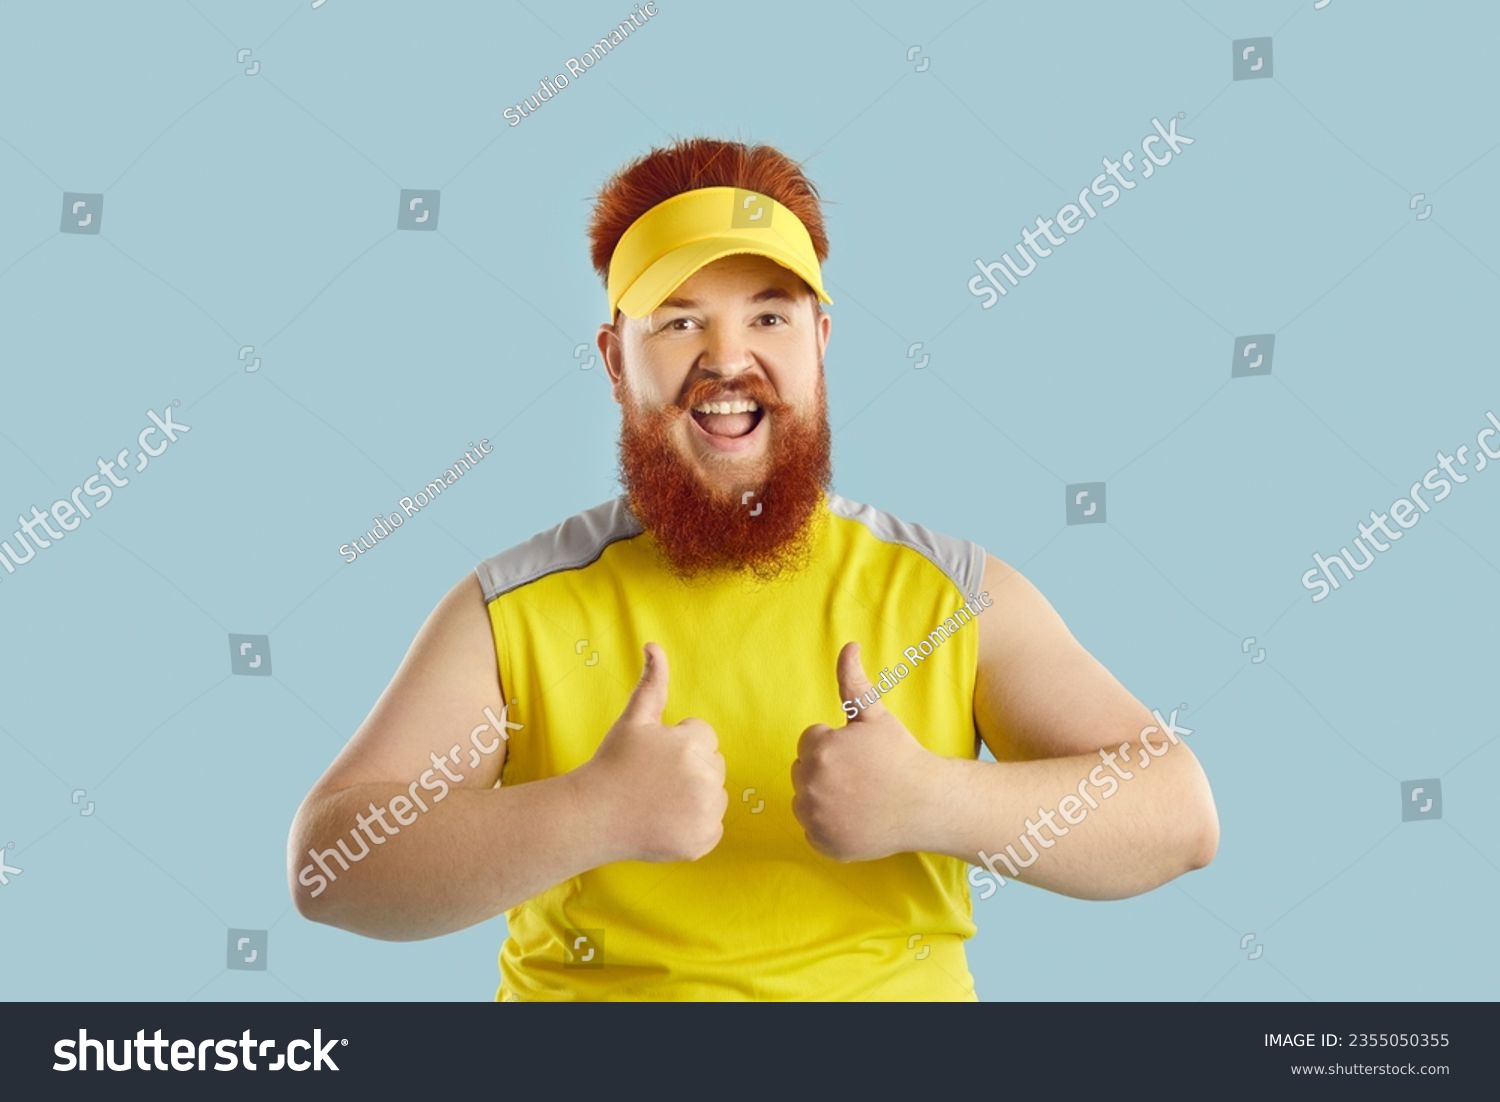 Funny happy fat man showing thumbs up motivating you to exercise isolated on light blue background. Young red-haired bearded man in sporty visor and T-shirt looks at camera with funny expression #2355050355